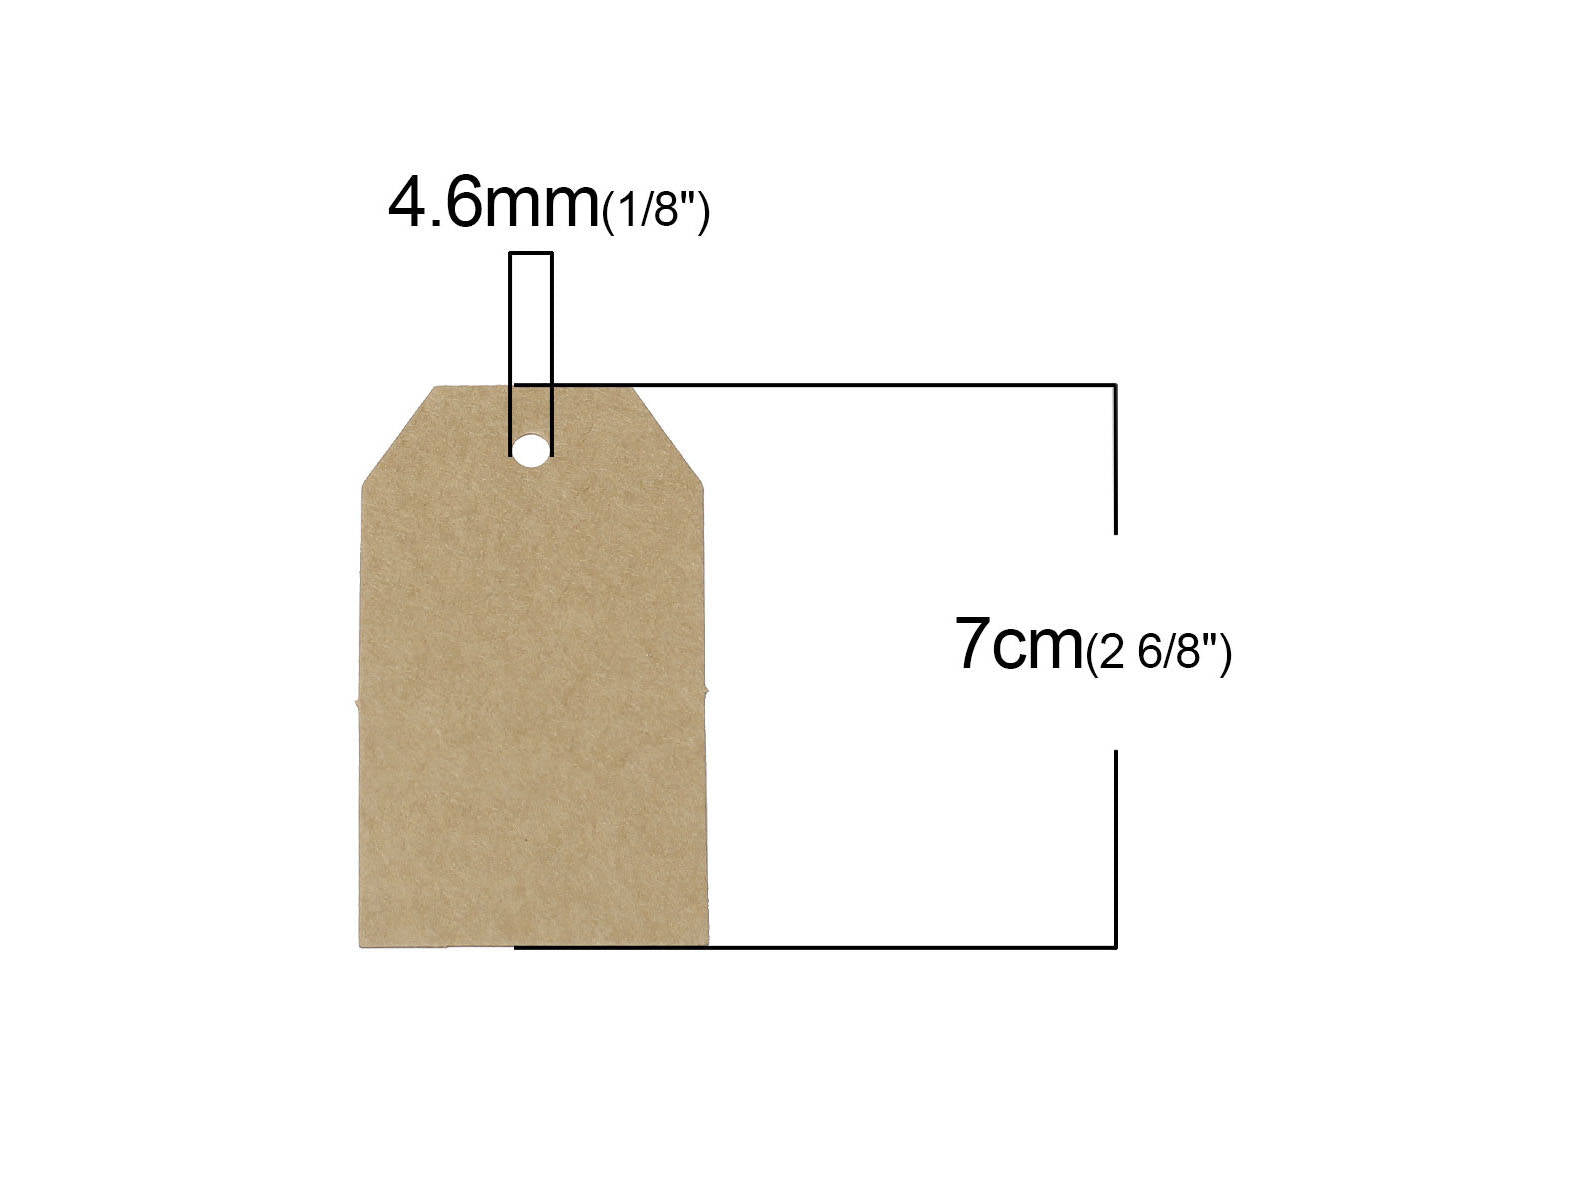 Polygon rectangle gift tags - blank kraft paper tags - Set of 10 or 50